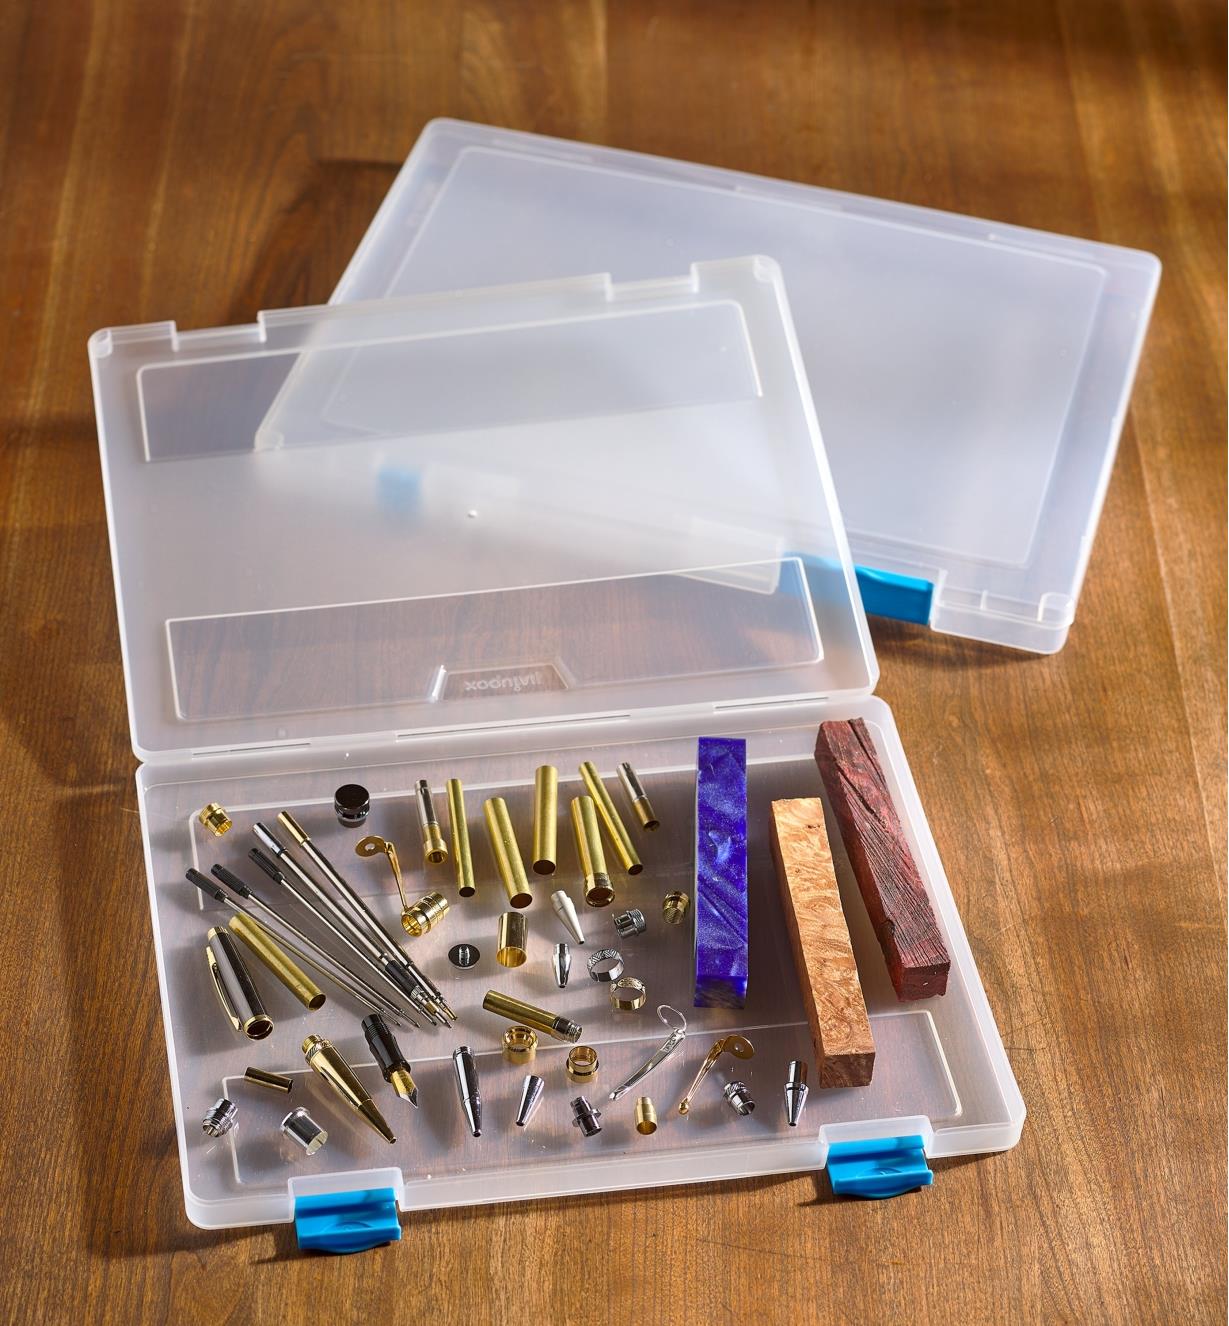 A letter-size case full of pen-turning supplies lying on a table beside an empty legal-size case